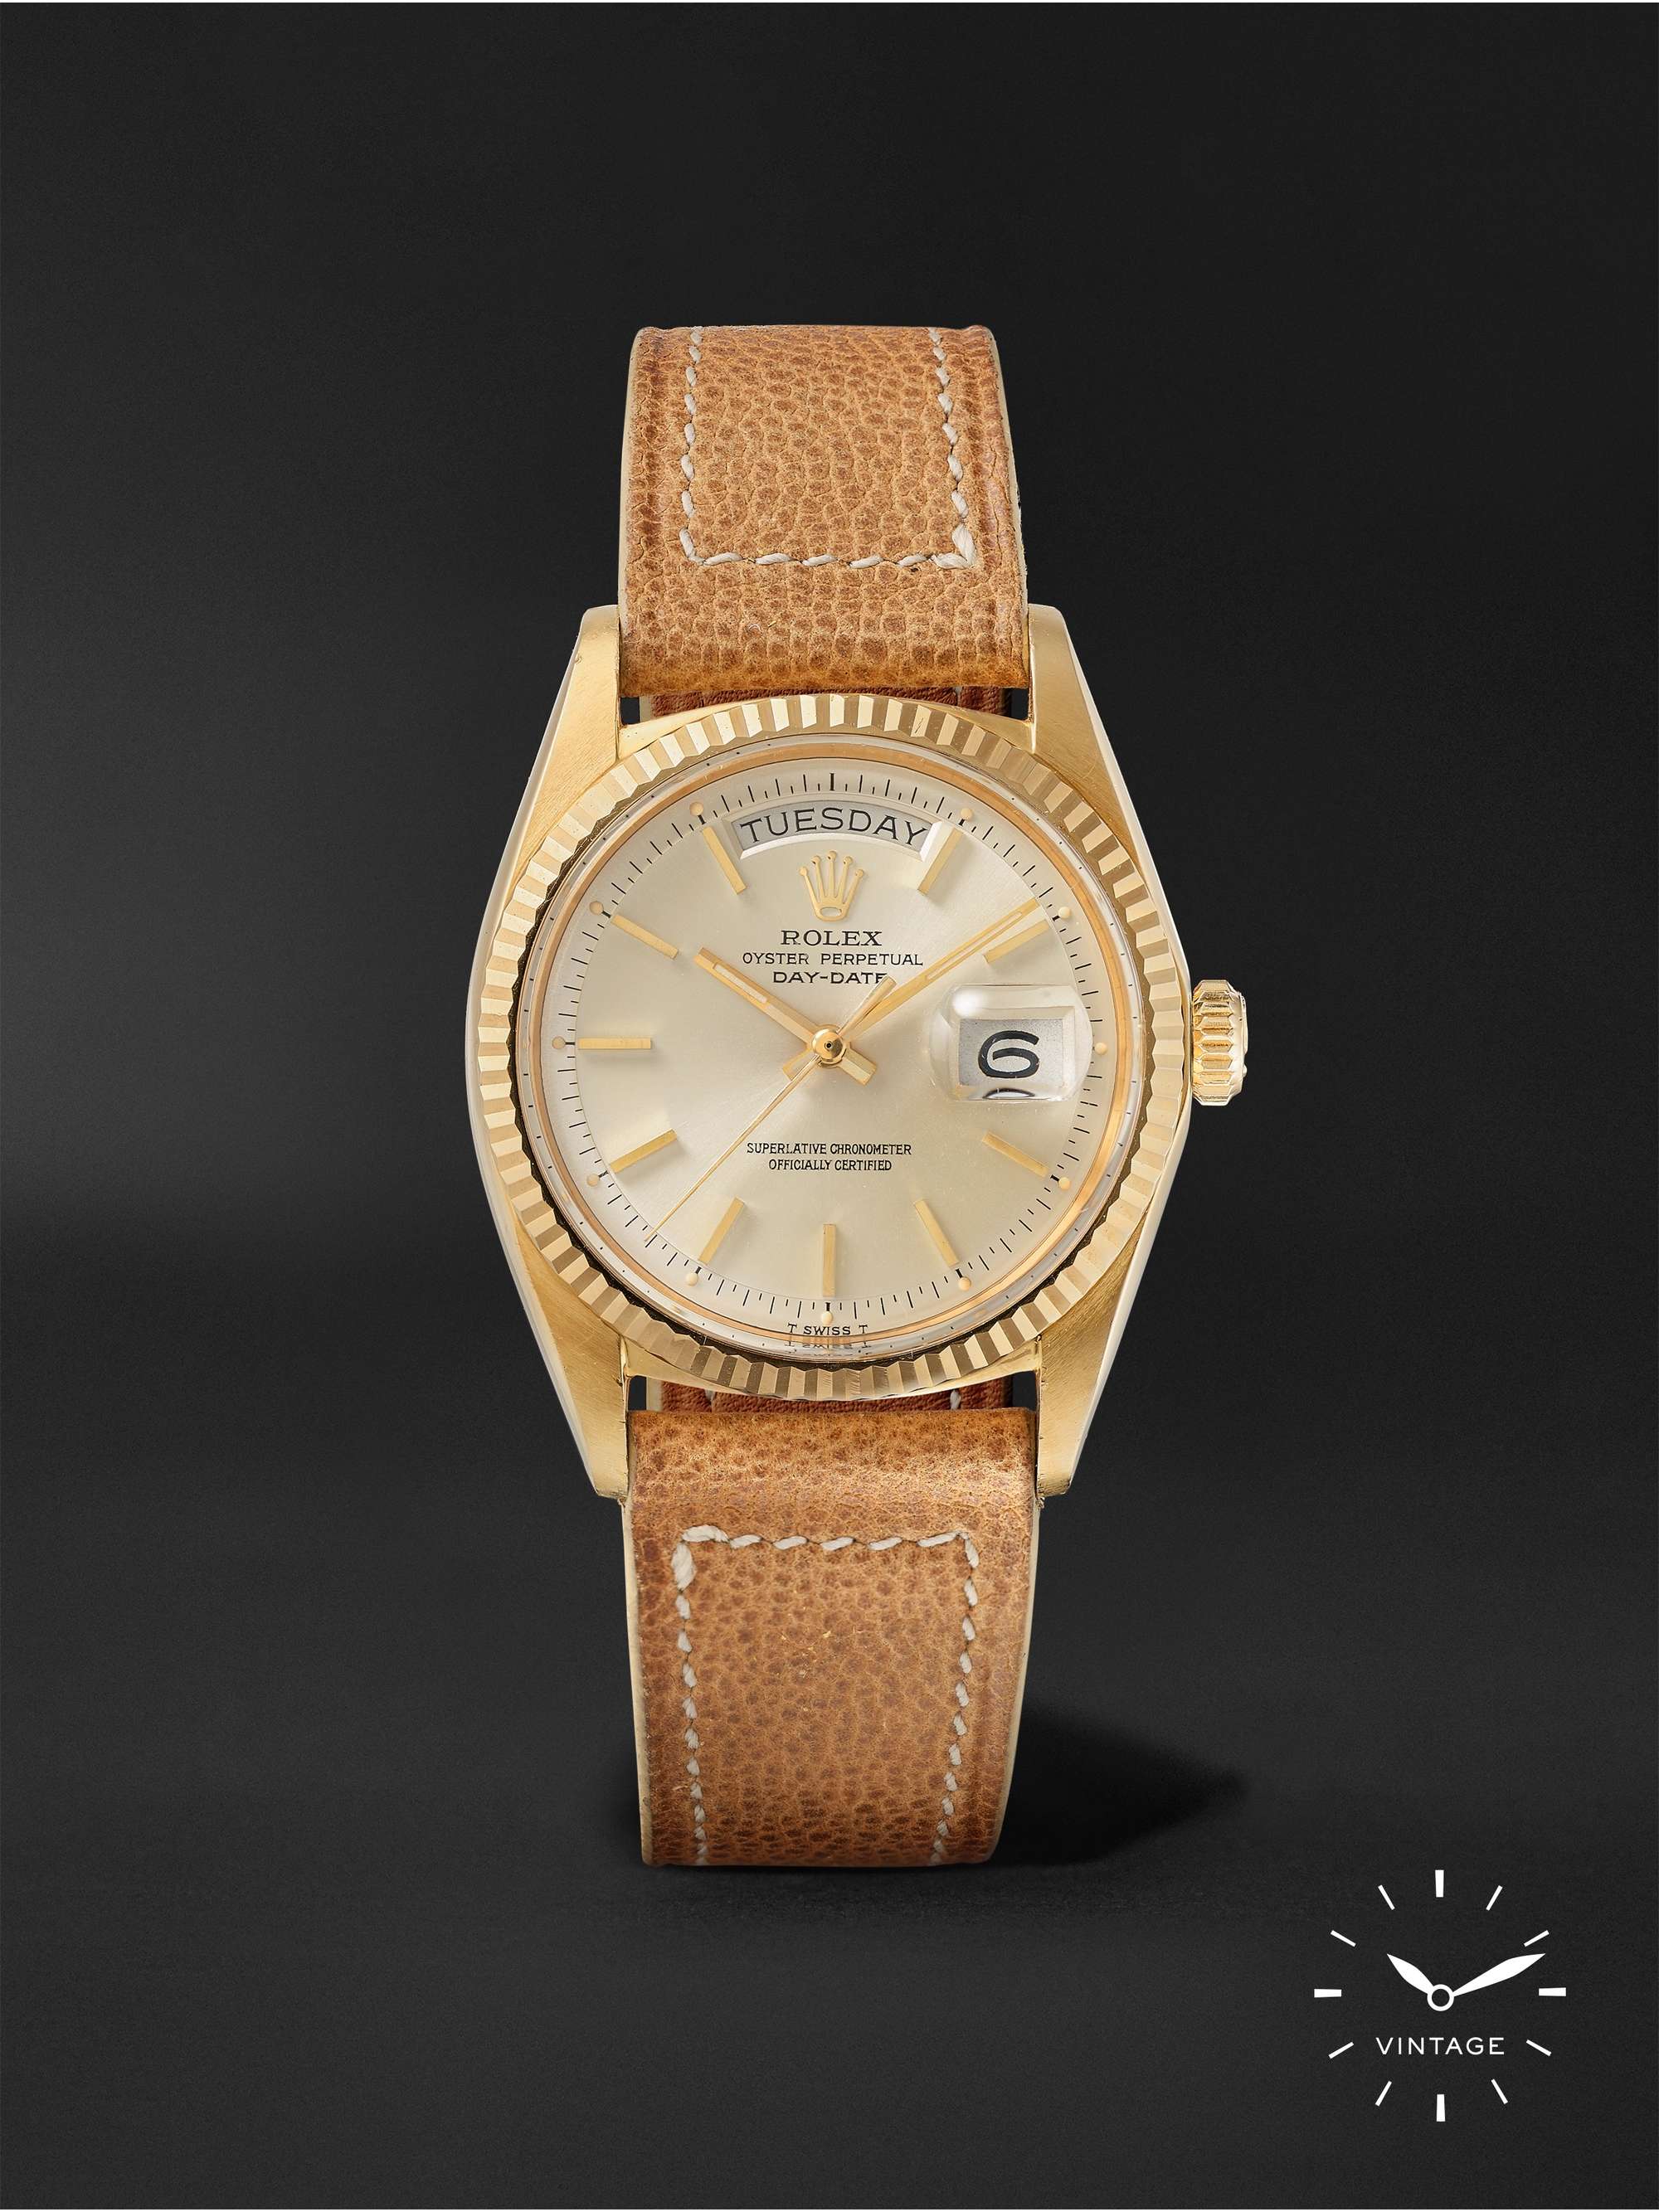 WIND VINTAGE Pre-Owned 1971 Rolex Day-Date Automatic 36mm 18-Karat Gold and Leather Watch, Ref. No. 1803